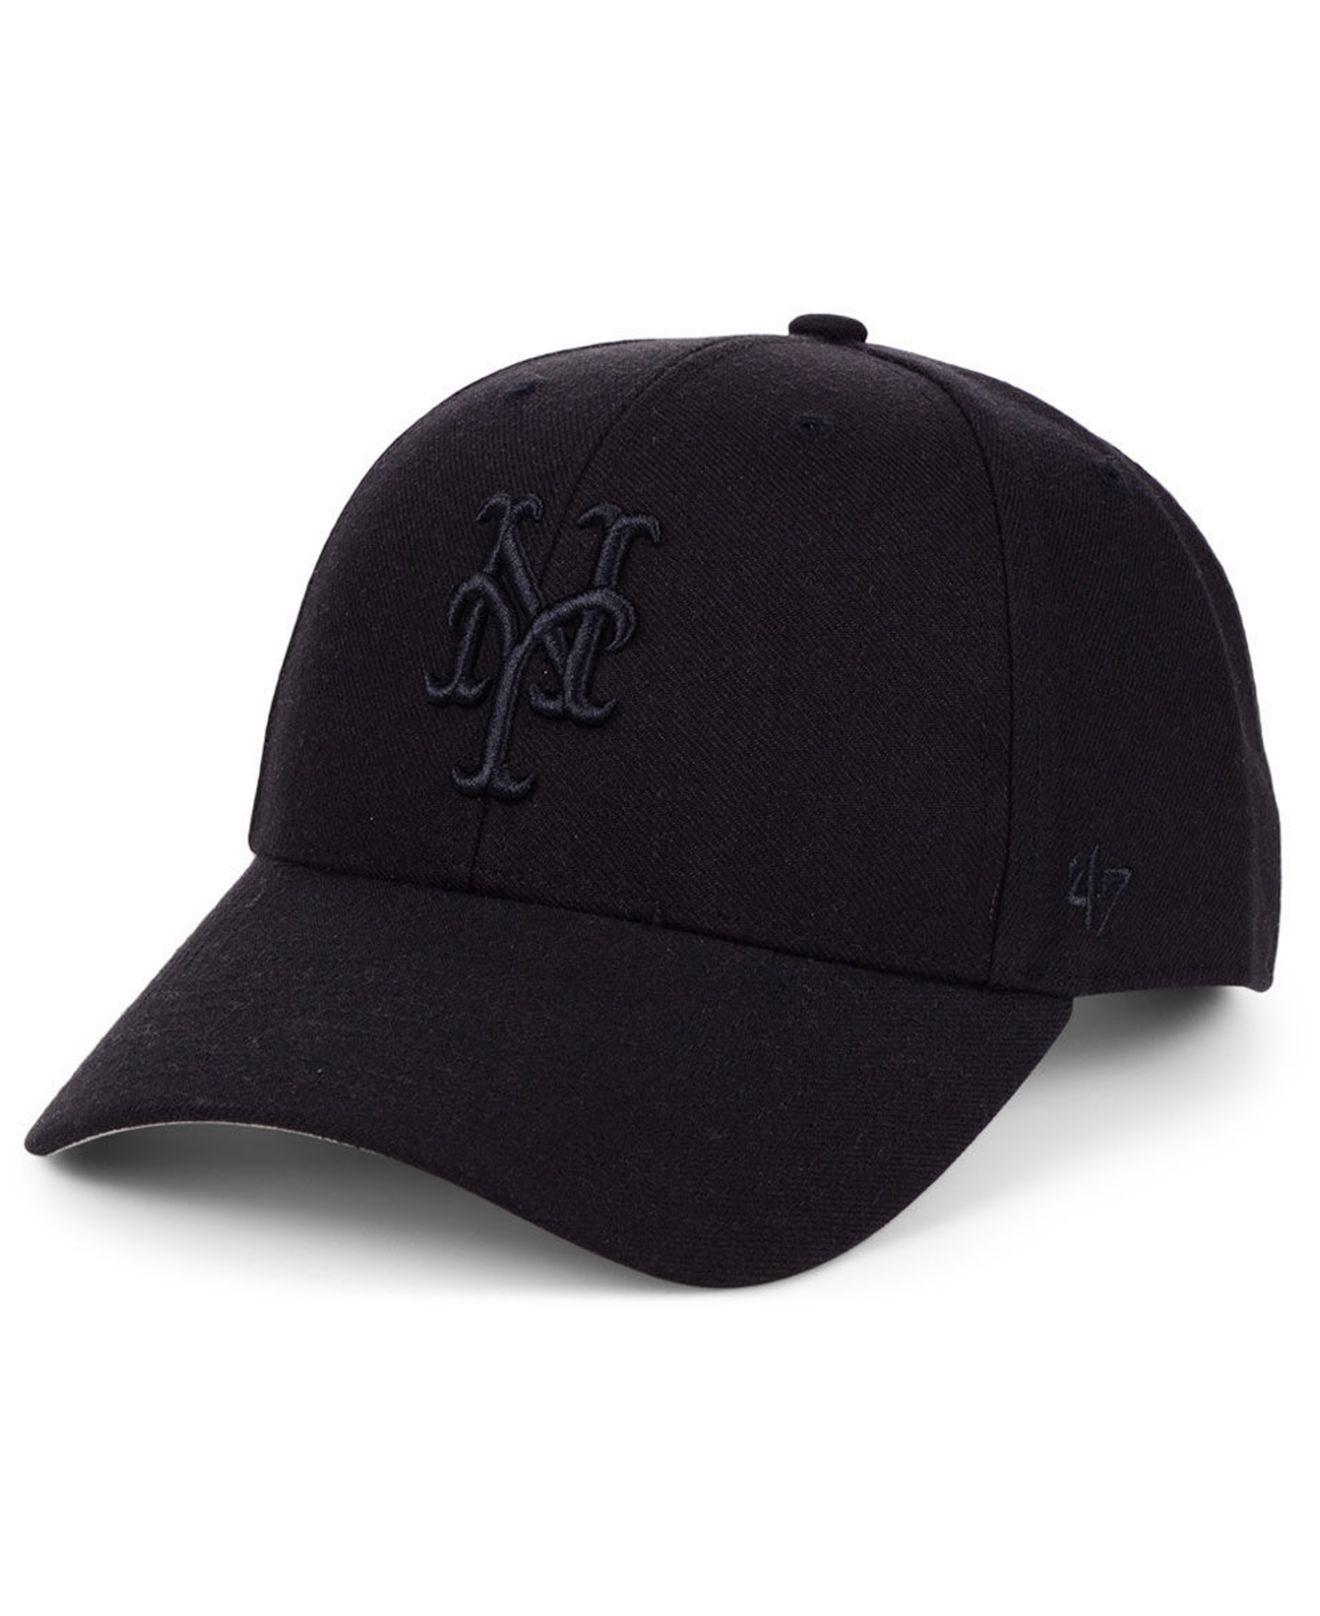 New York Mets Black trucker hat - Embroidered Patch - BNEW Vintage baseball  cap